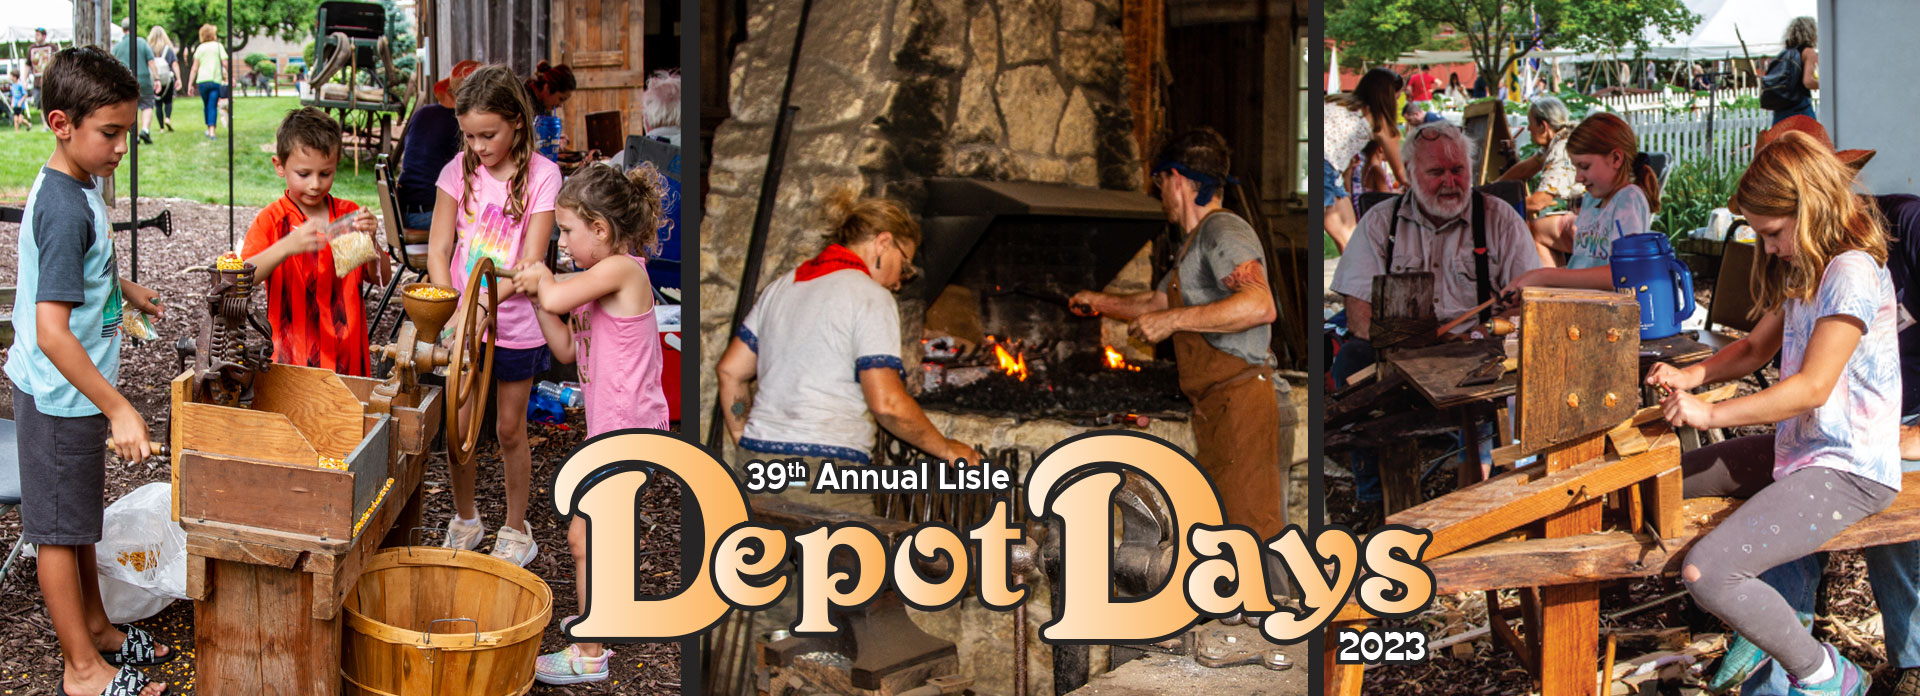 Depot Days at The Museums at Lisle Station Park